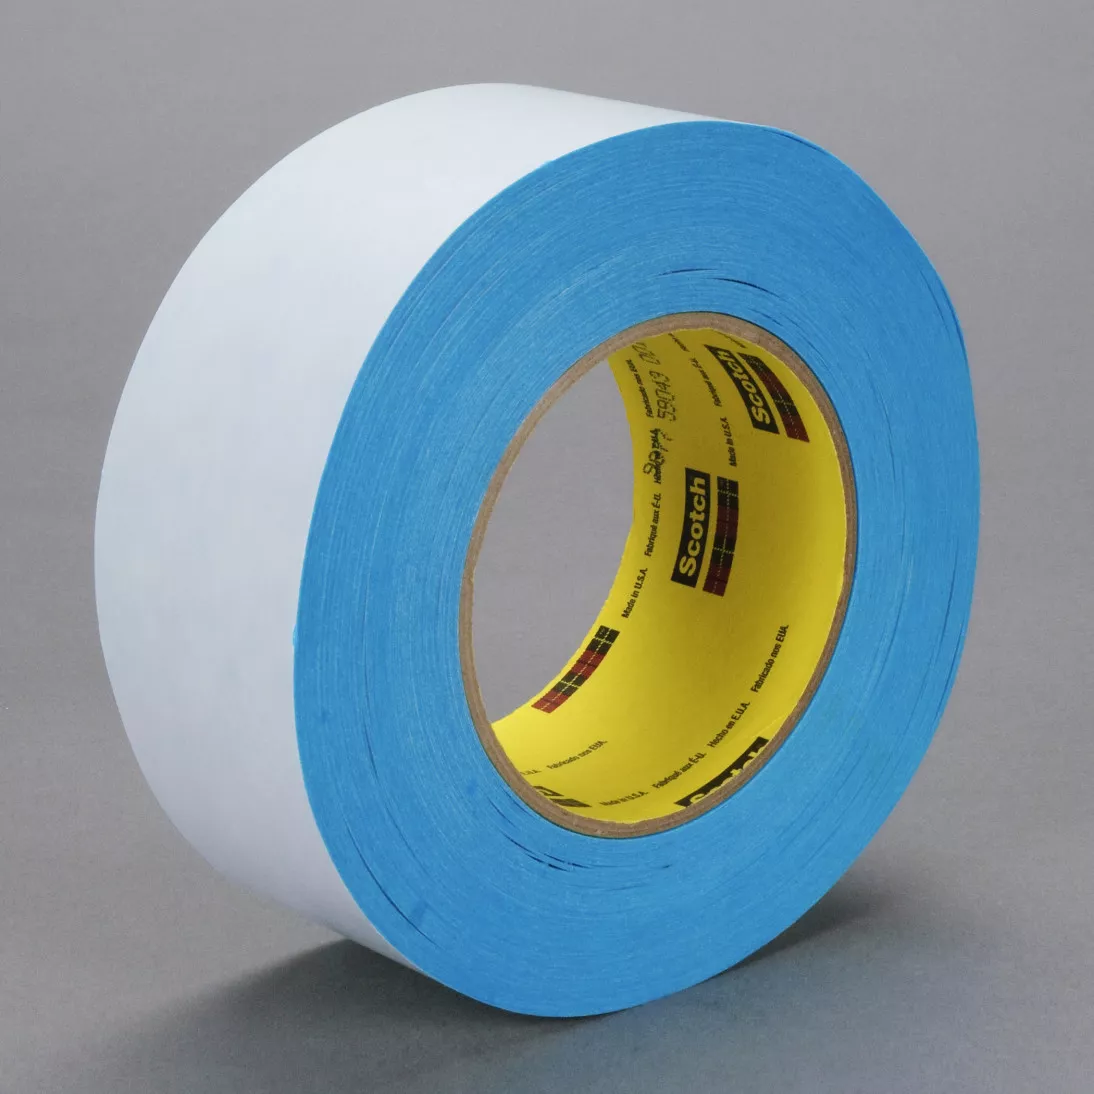 3M™ Repulpable Double Coated Flying Splice Tape High Strength 9977,
Blue, 60 mm x 55 m, 4 mil, 12 rolls per case